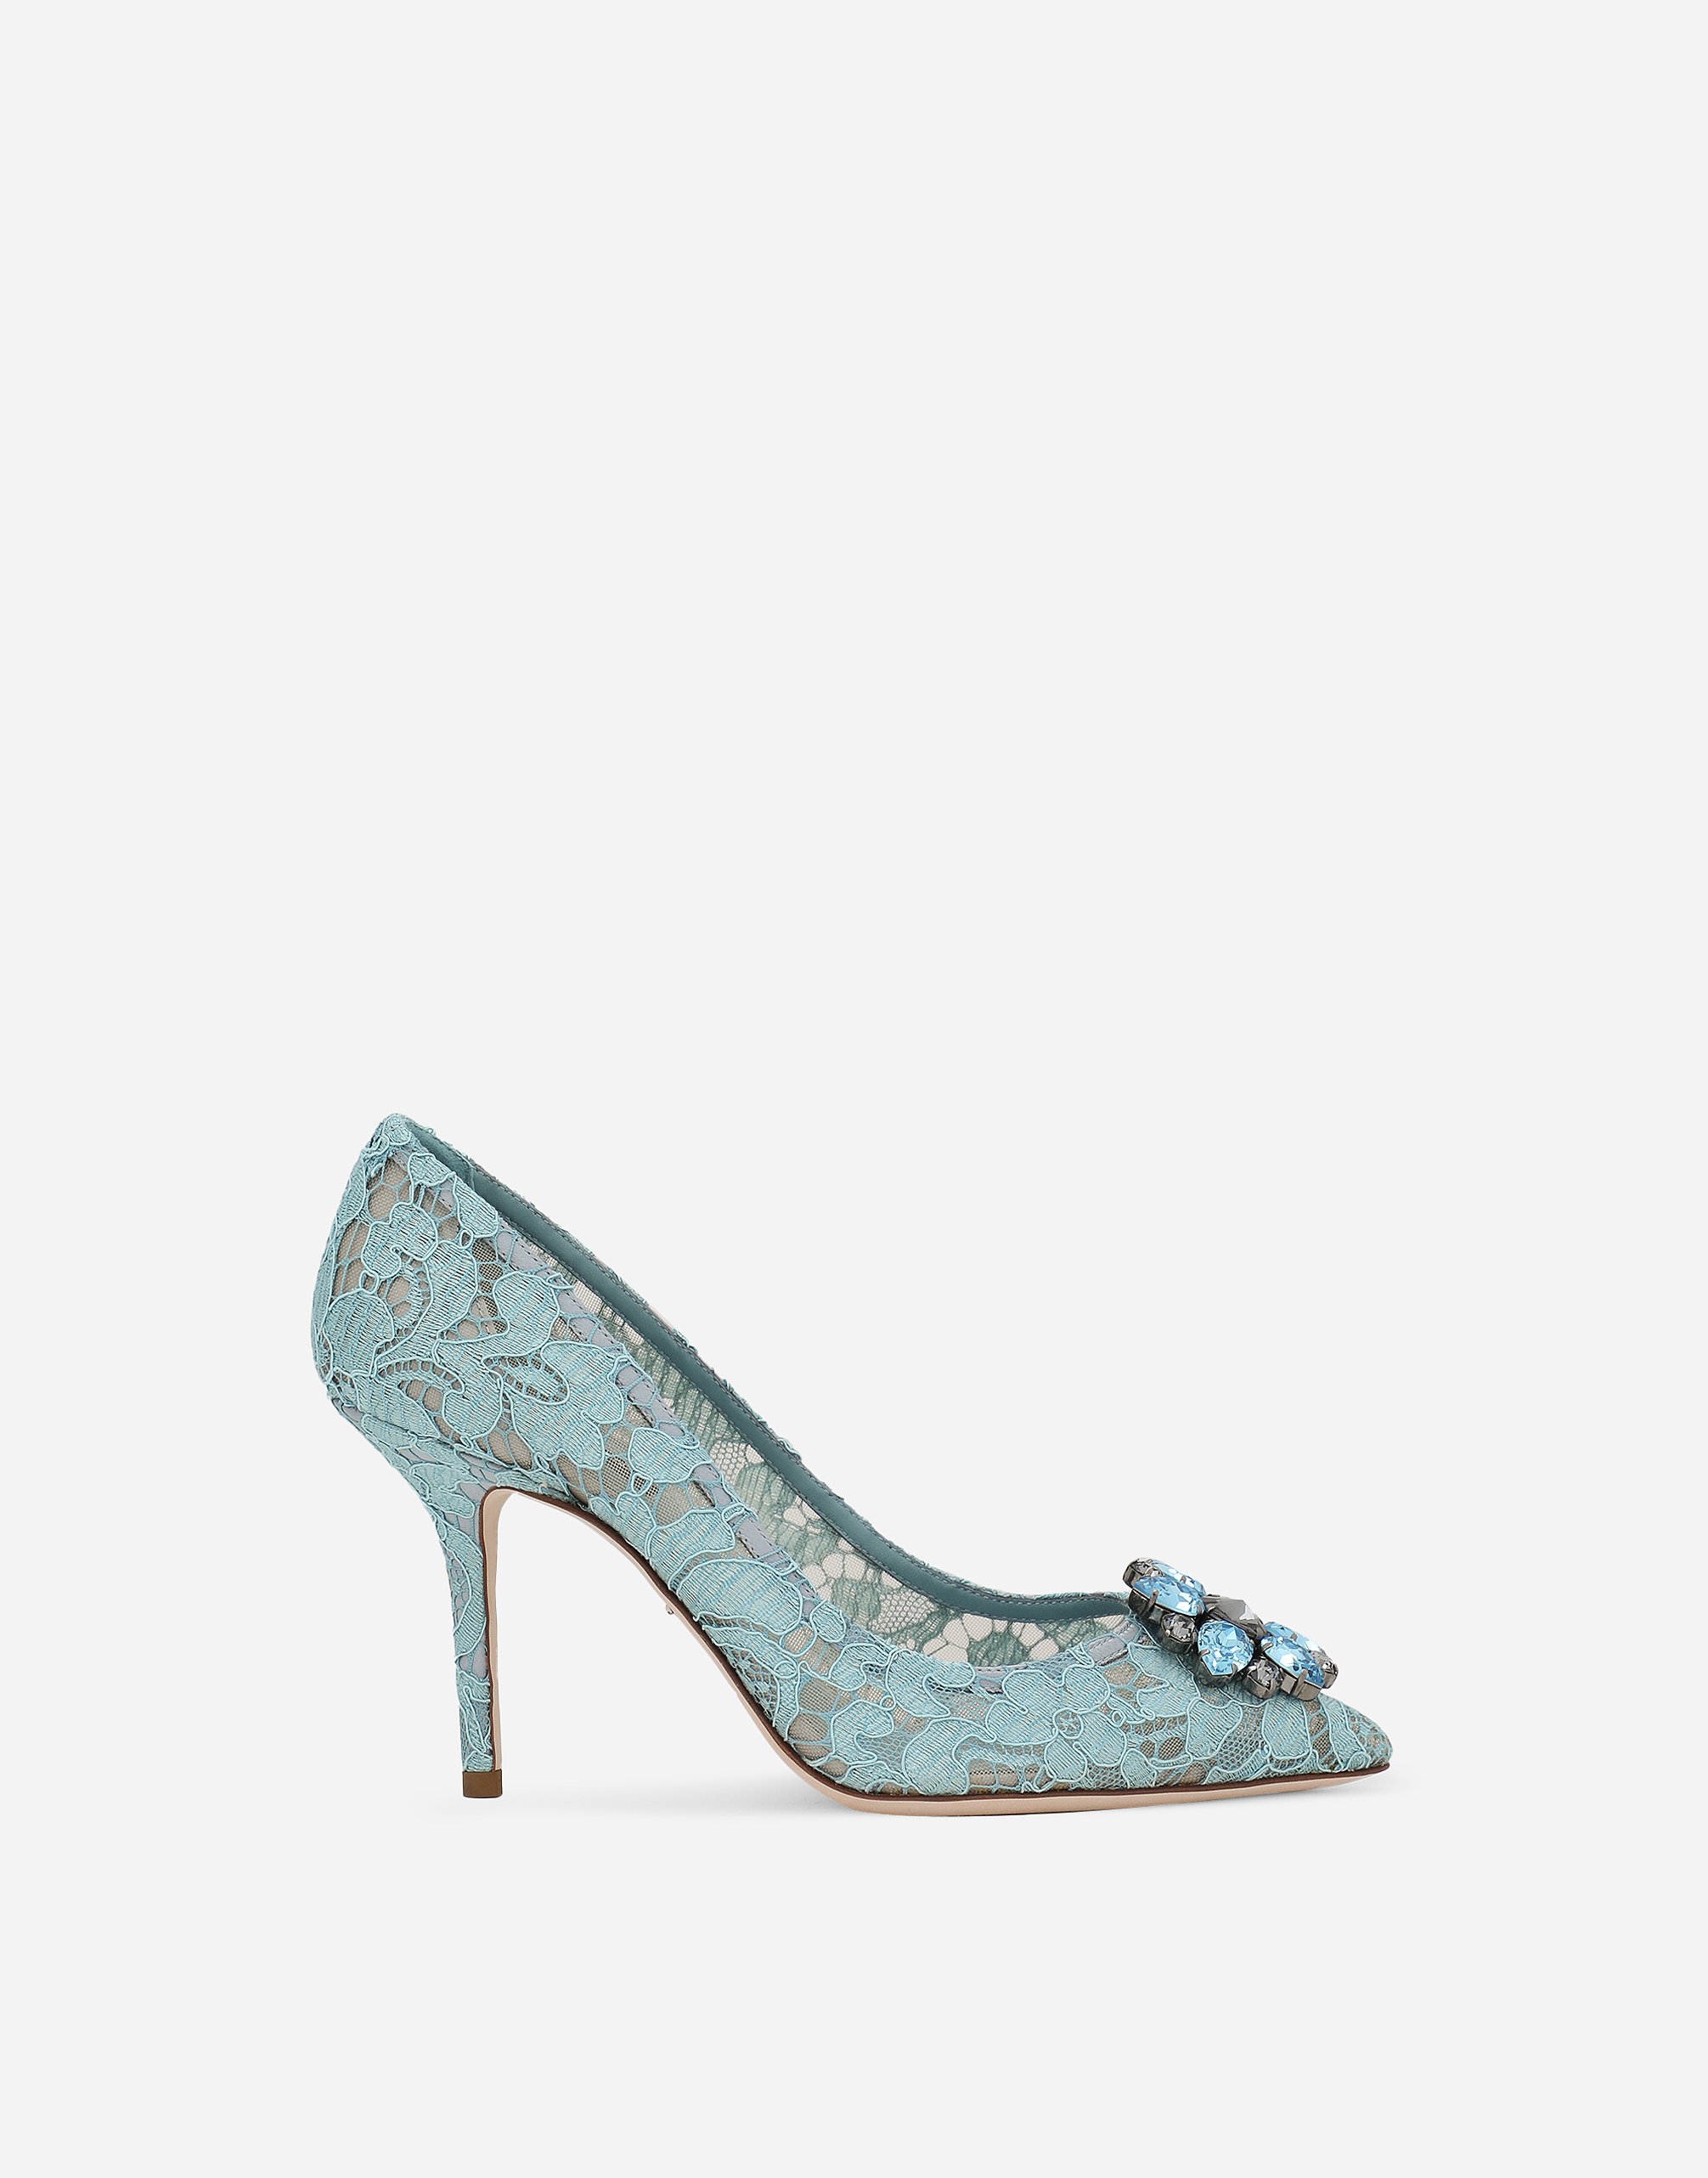 Lace rainbow pumps with brooch detailing in Azure